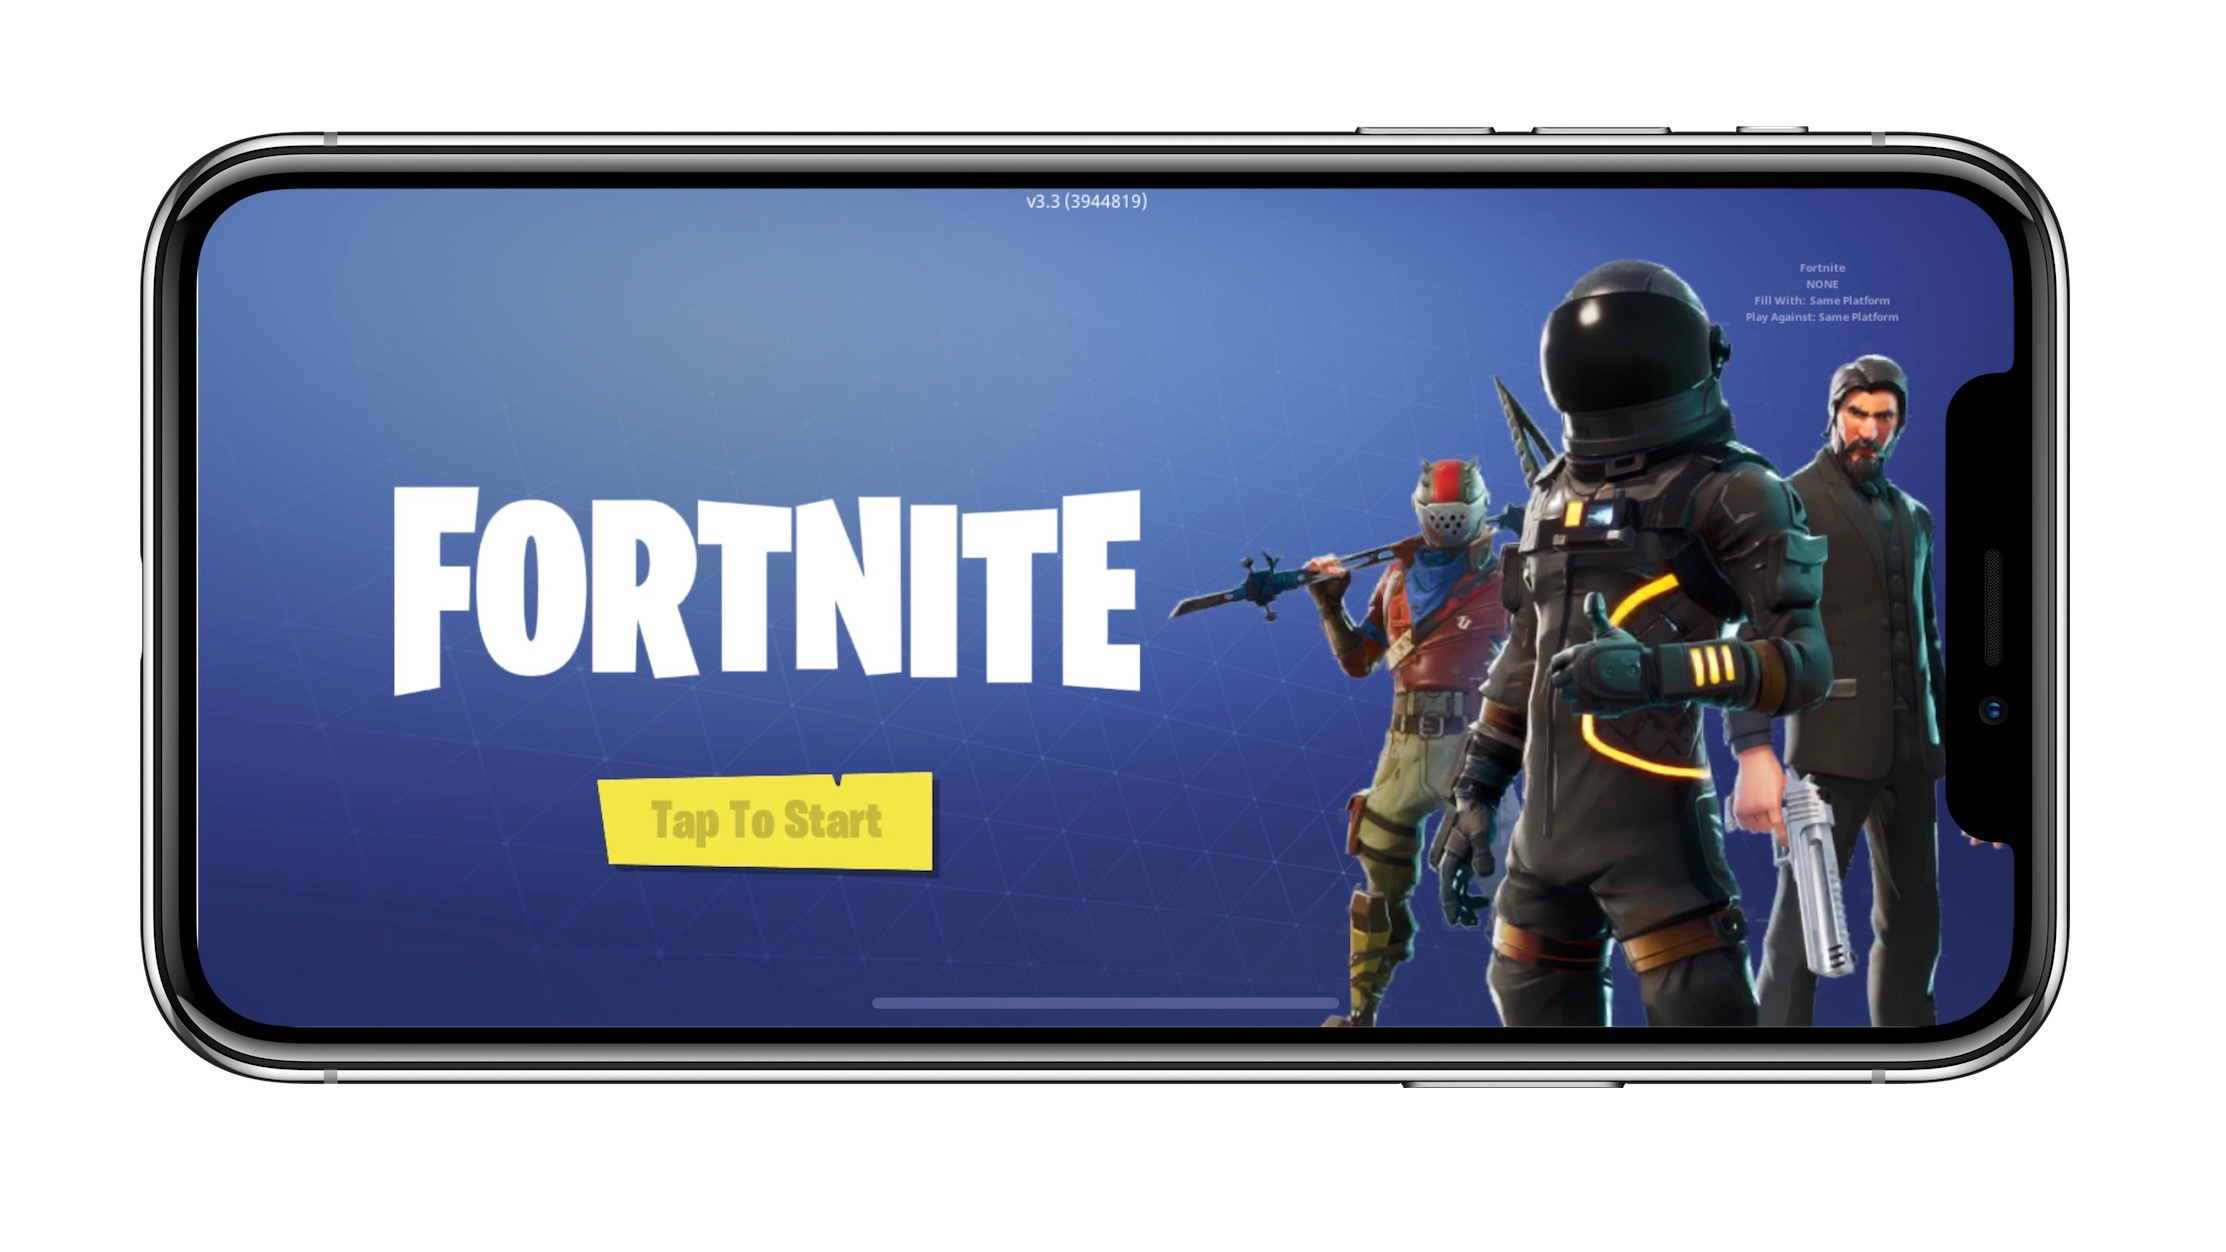 Is Fortnite Available On Ios Fortnite For Ios Is Now Live In The App Store Here S How To Get An Invite 9to5mac